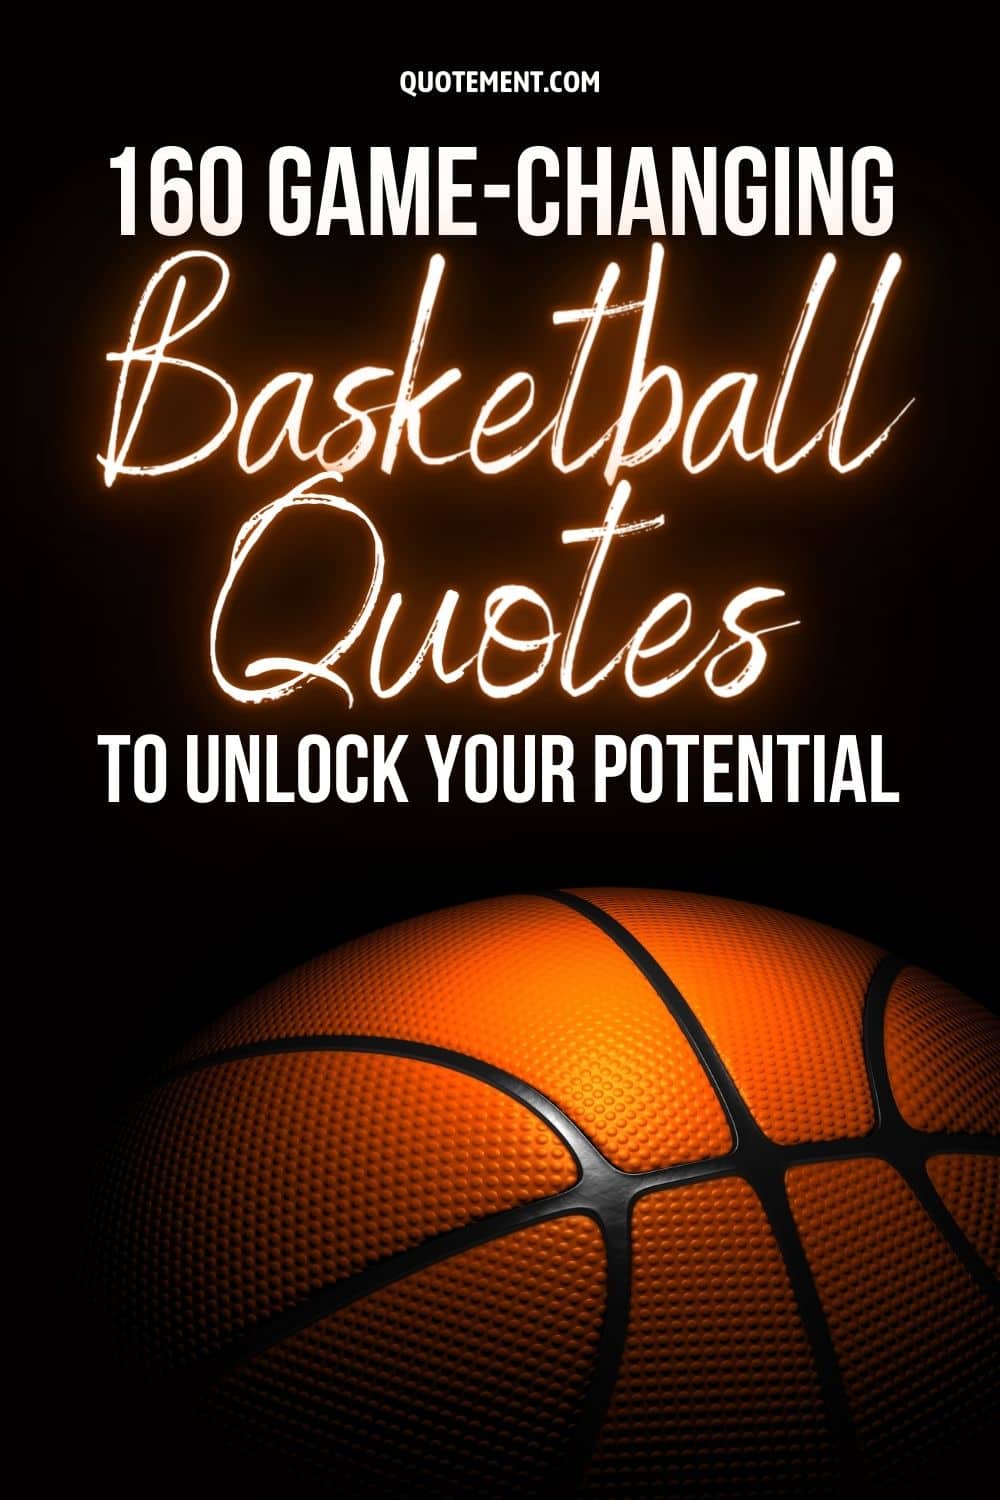 160 Game-Changing Basketball Quotes To Unlock Your Potential